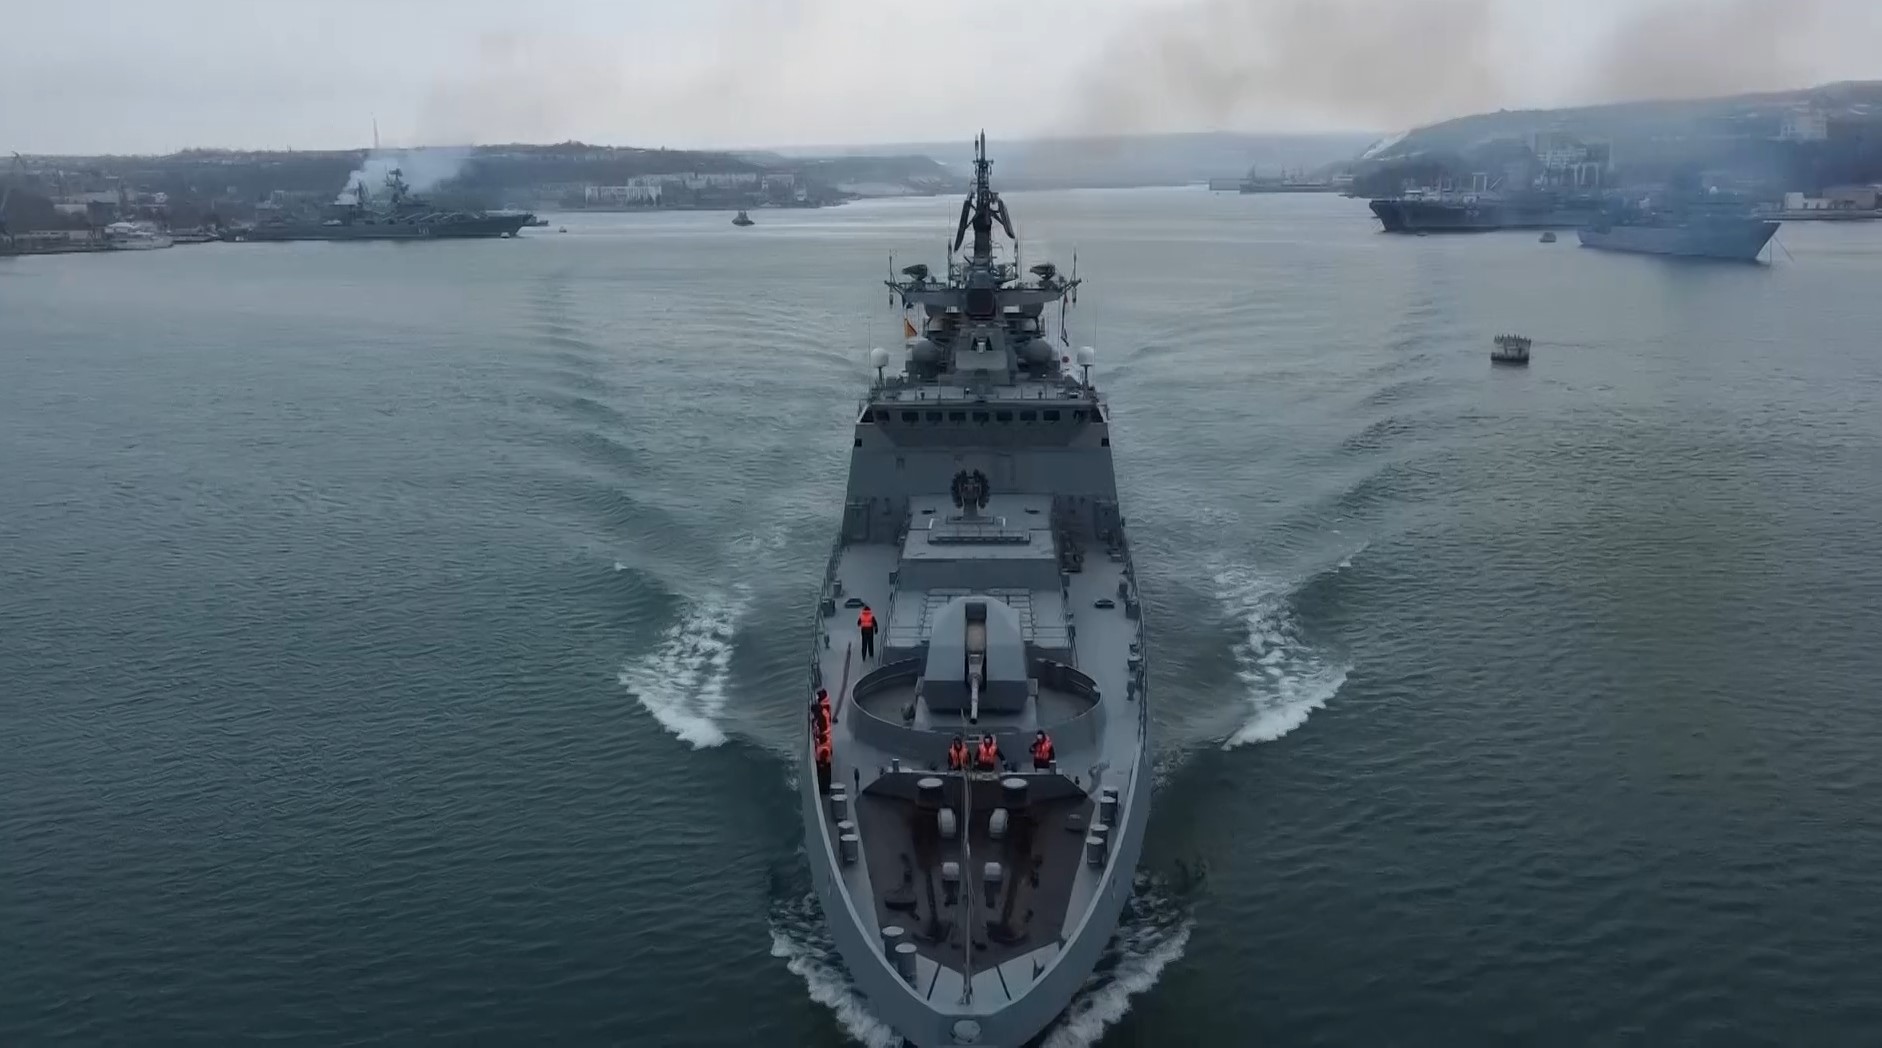 Russia’s Black Sea Fleet in the “Special Military Operation” in Ukraine